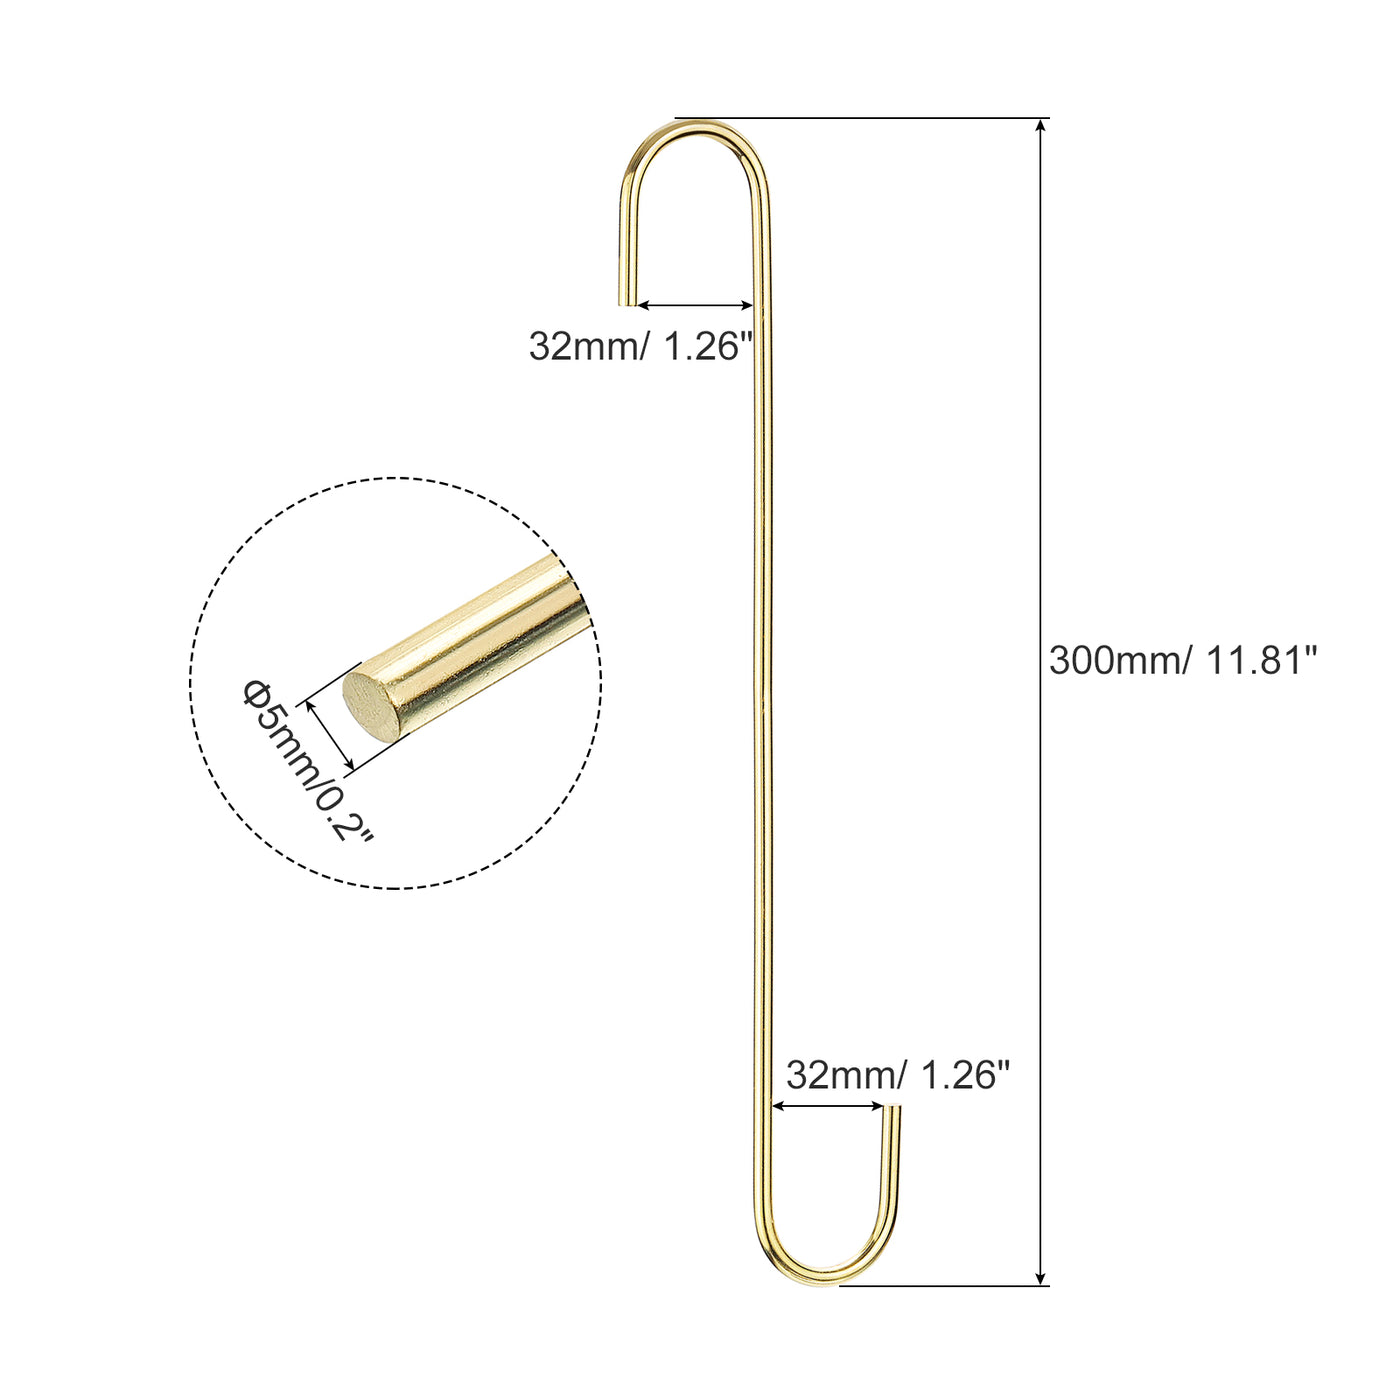 uxcell Uxcell S Hanging Hooks, 12inch(300mm) Extra Long Steel Hanger, Indoor Outdoor Uses for Garden, Bathroom, Closet, Workshop, Kitchen, Gold Tone, 8Pcs